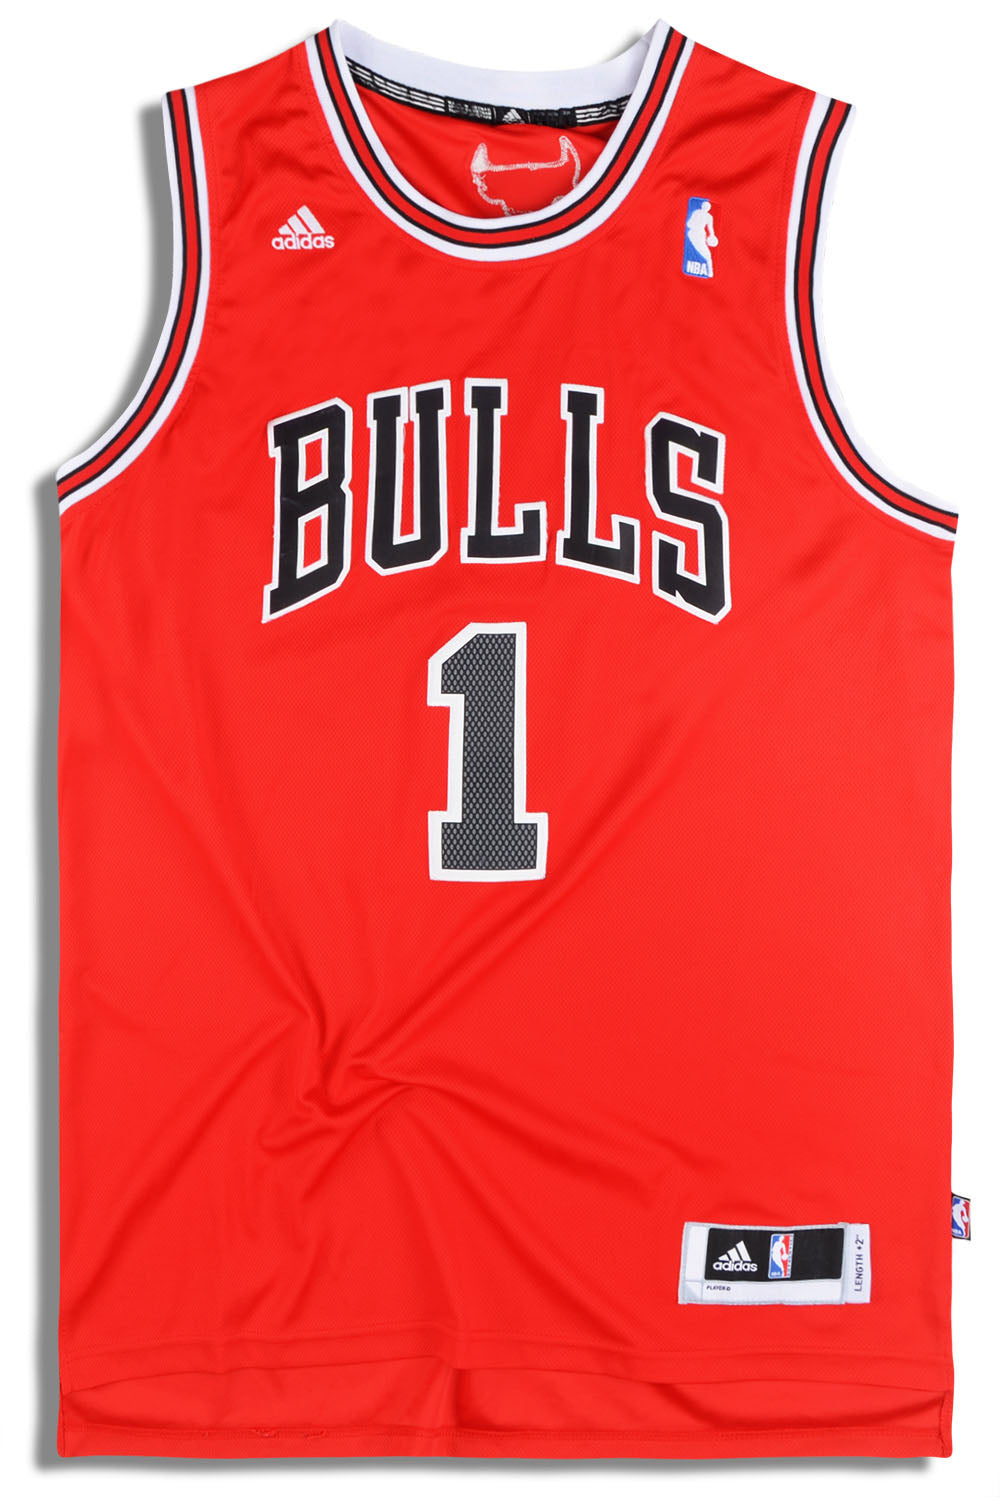 2010-14 CHICAGO BULLS ROSE #1 ADIDAS JERSEY (HOME) XL - W/TAGS - Classic  American Sports